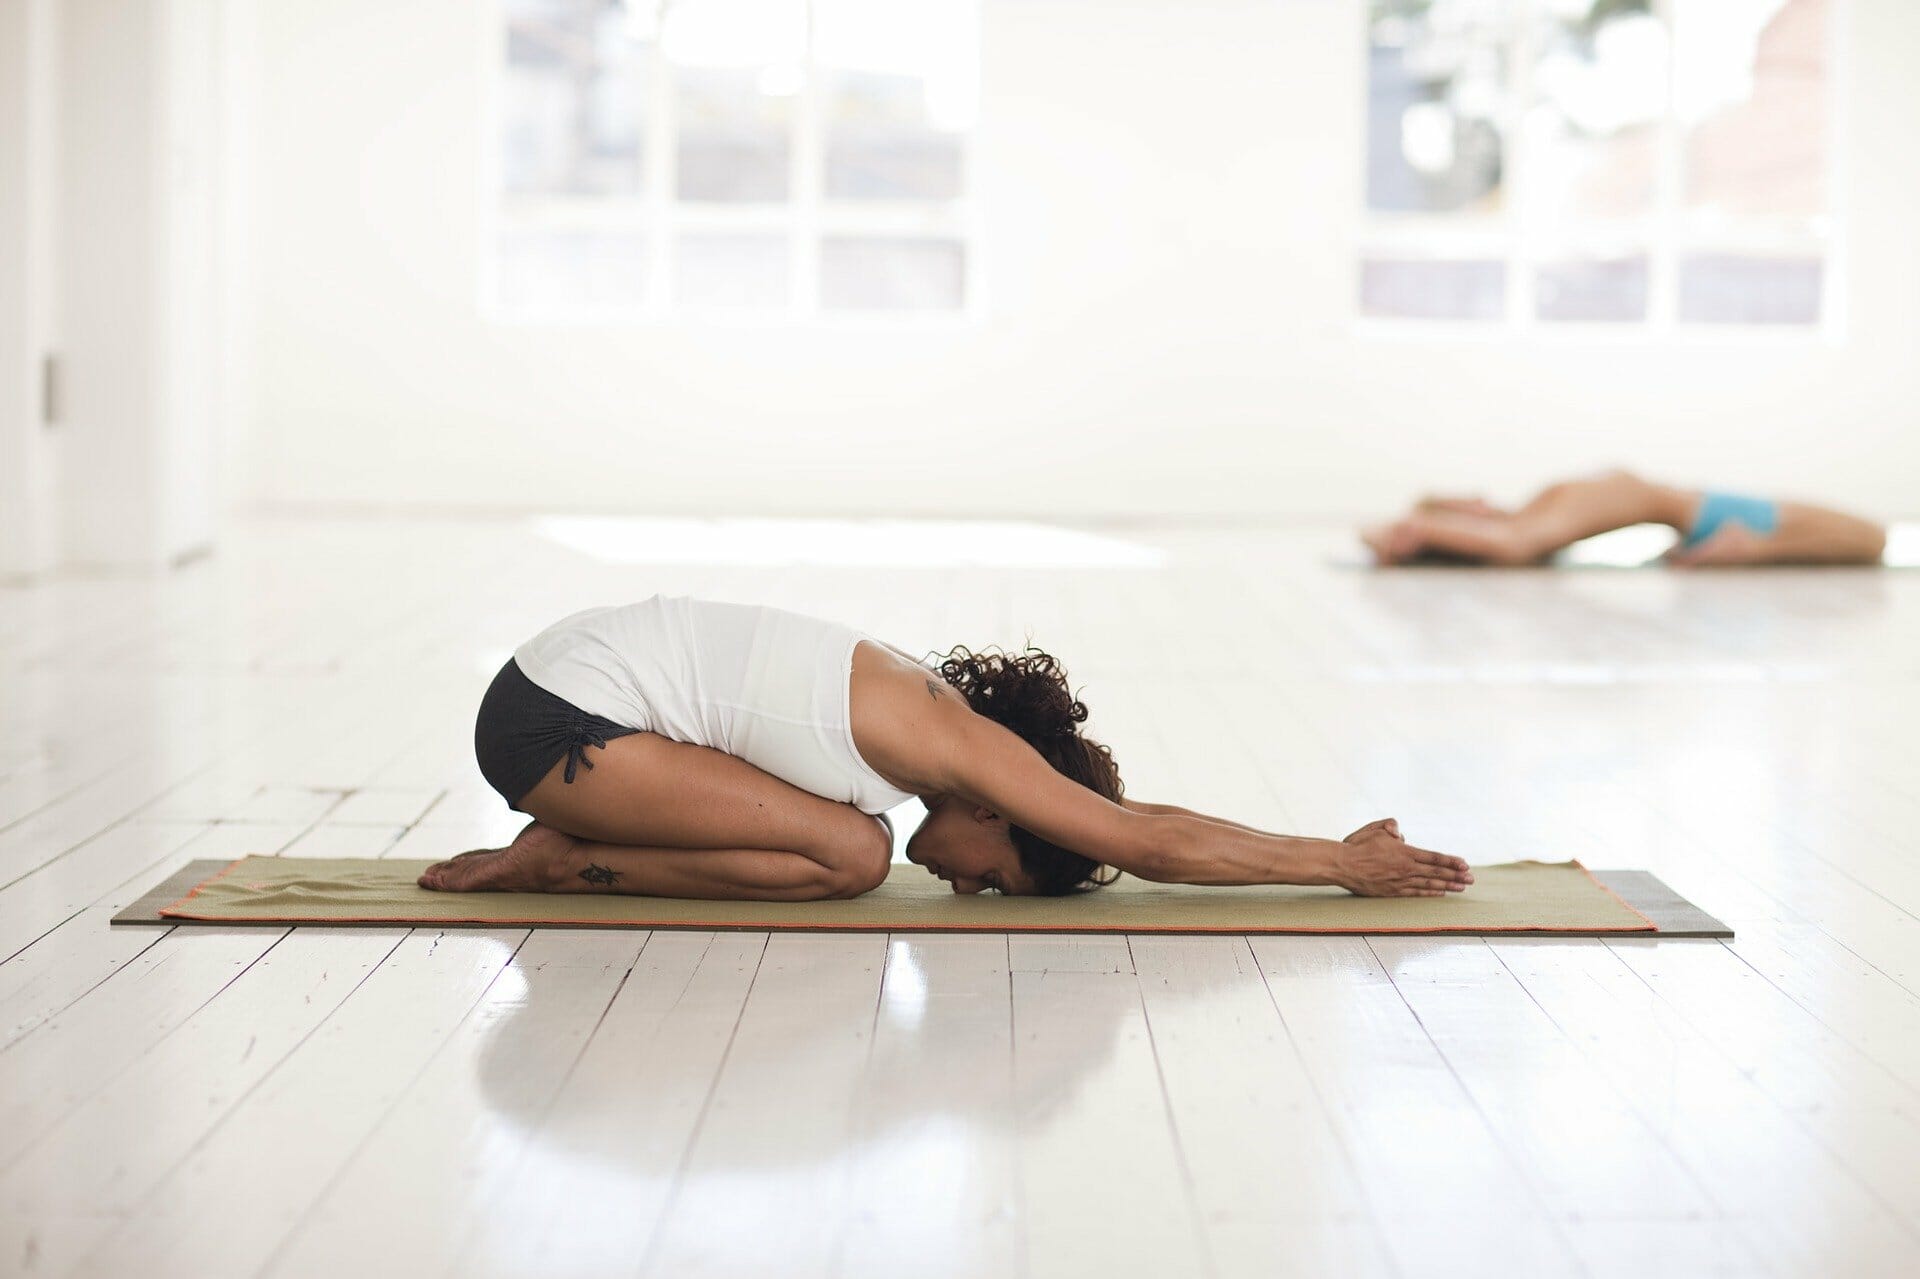 Which yoga poses can help with back pain?